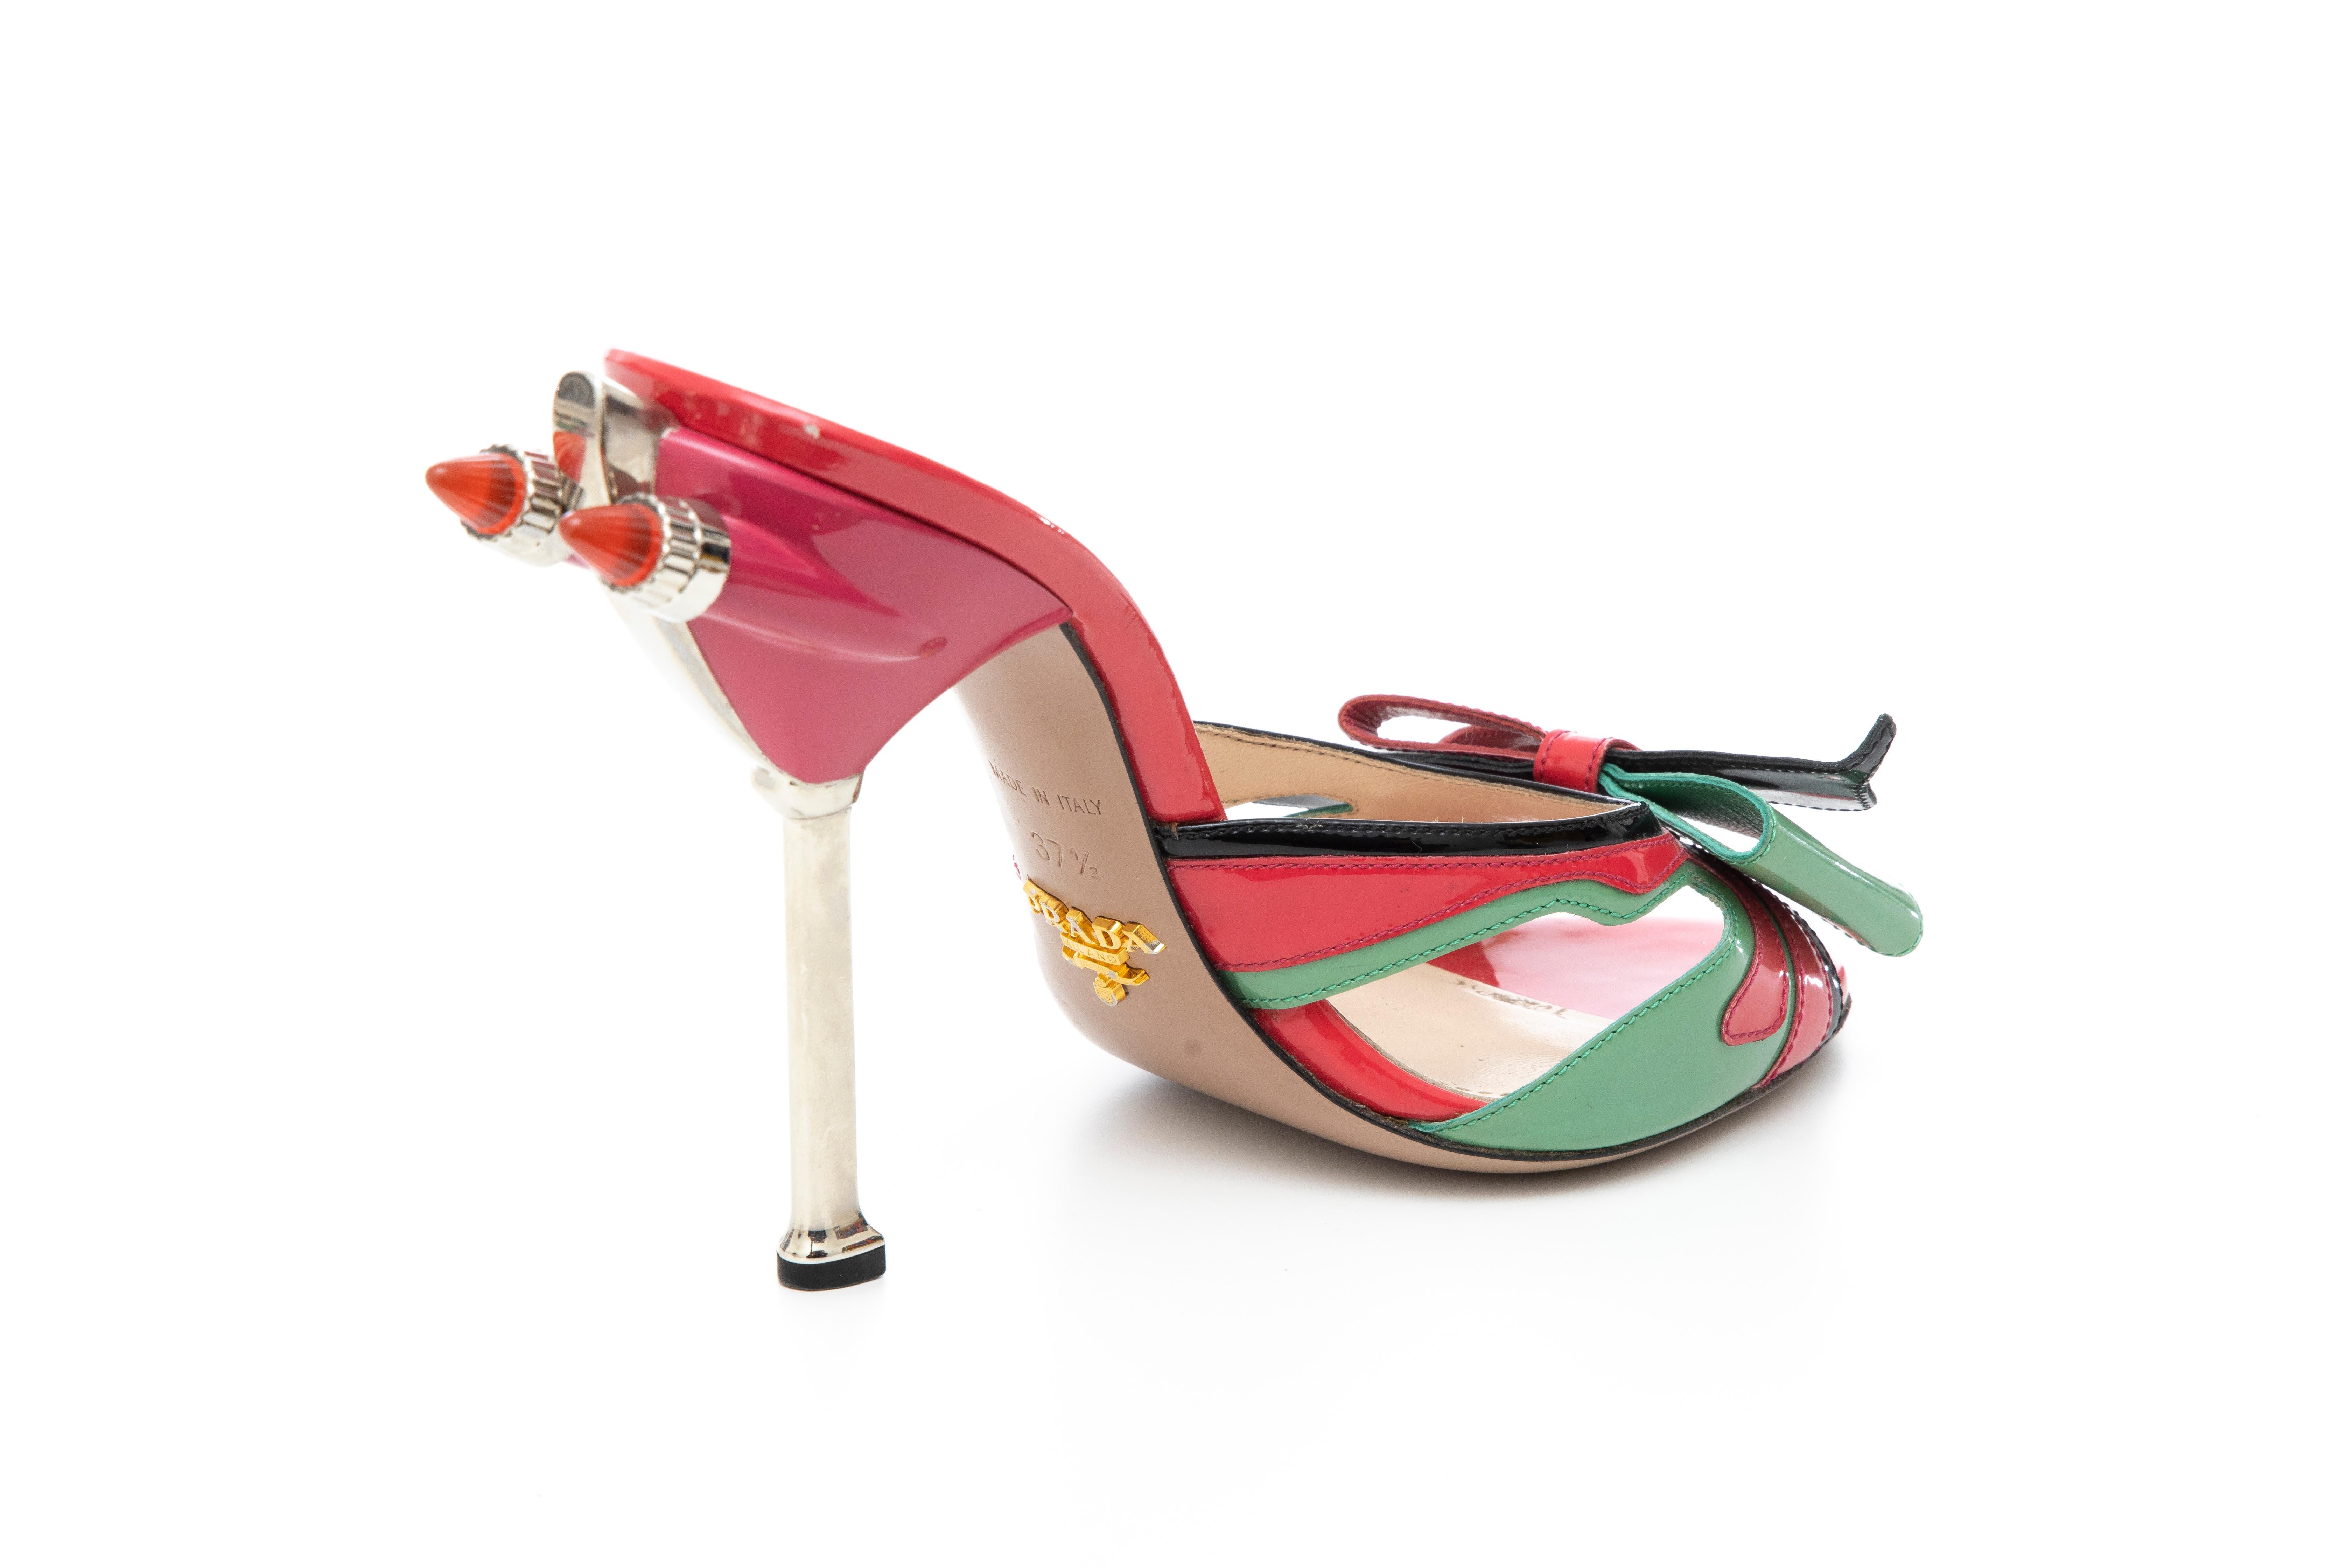 Prada Runway Patent Leather Tail Light Sandal, Spring 2012 For Sale 2